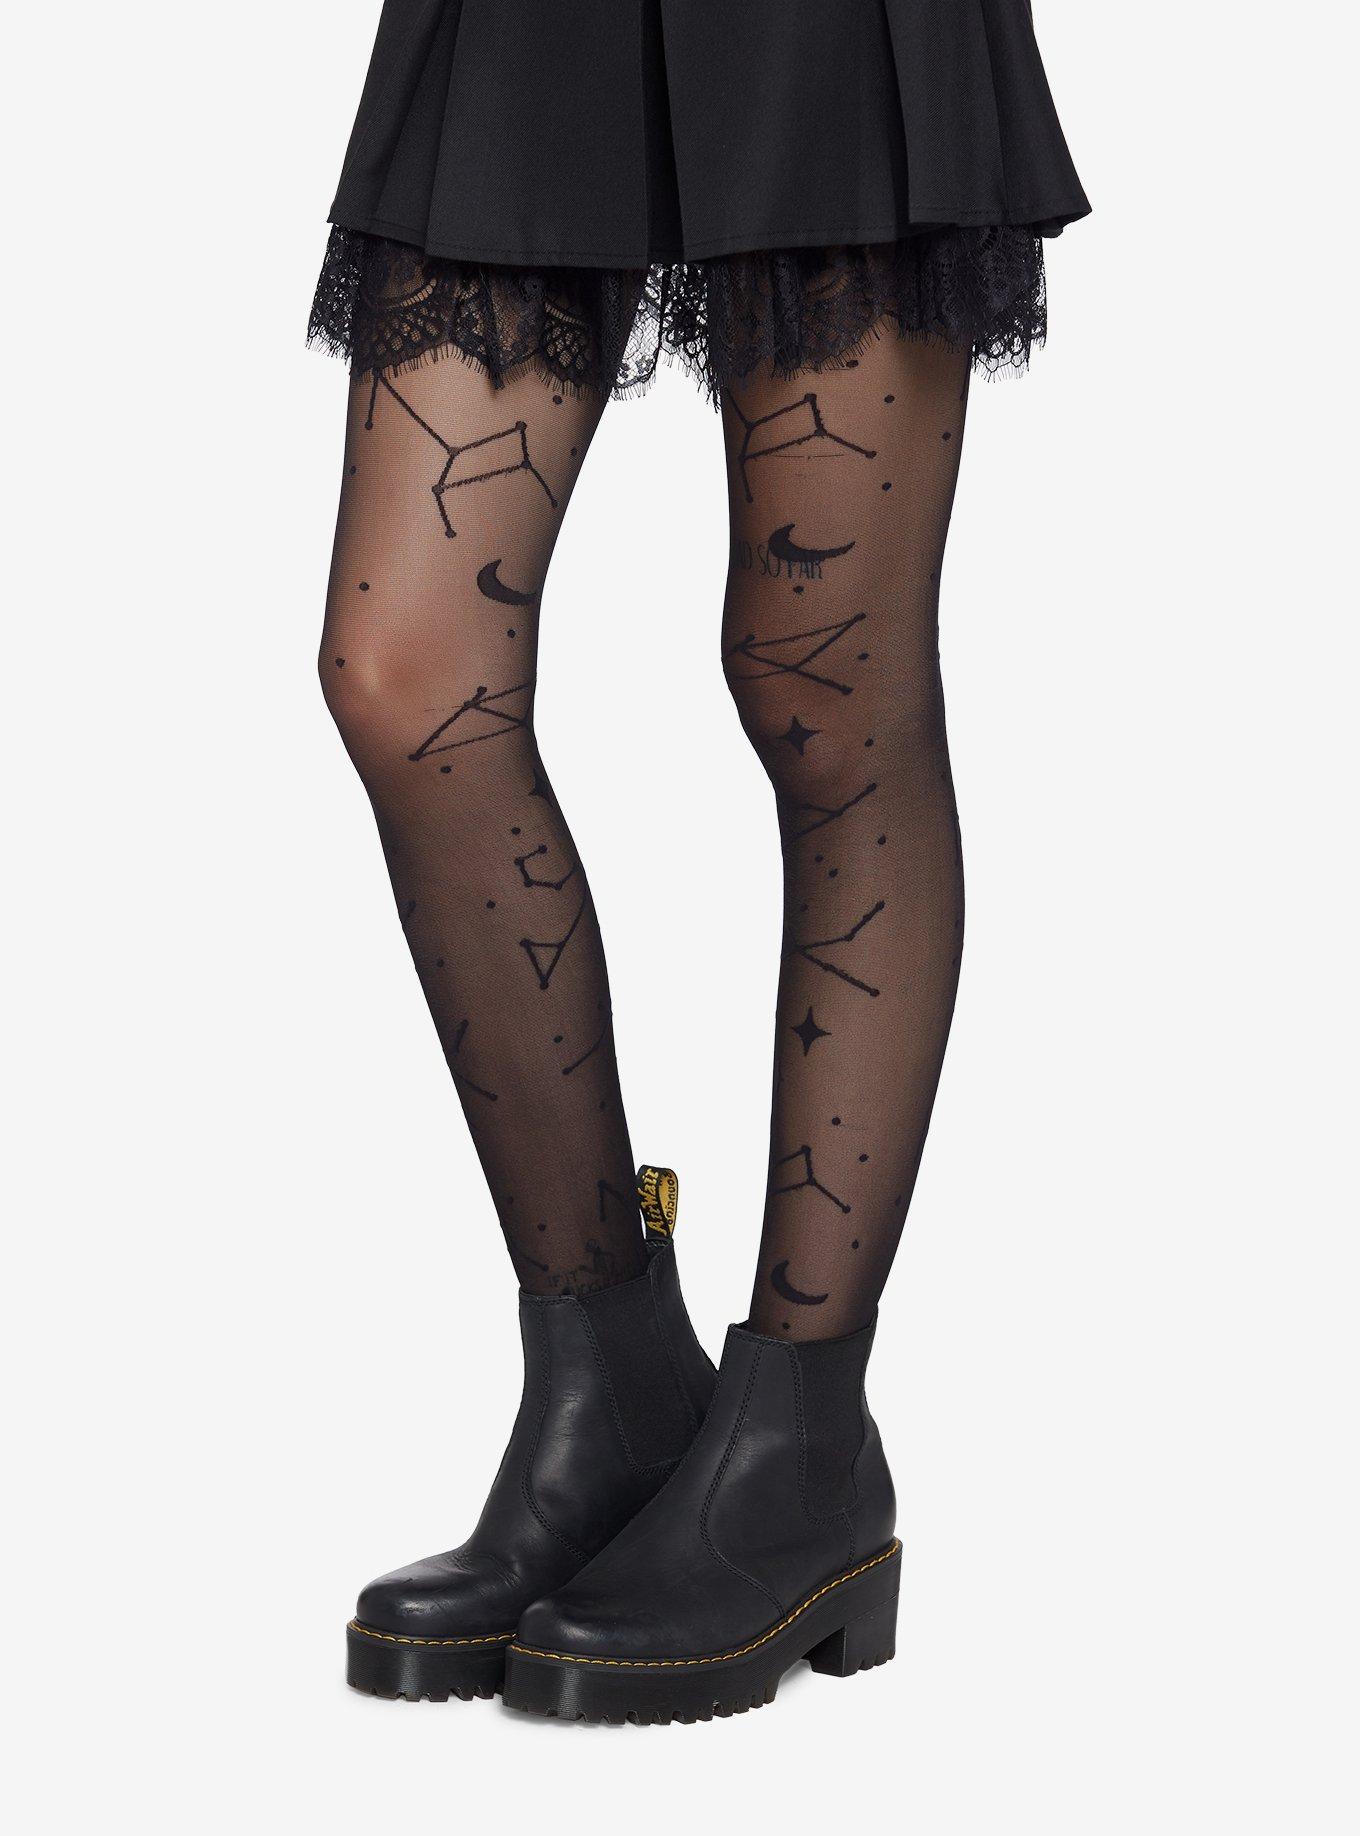 Astrology Constellation Tights